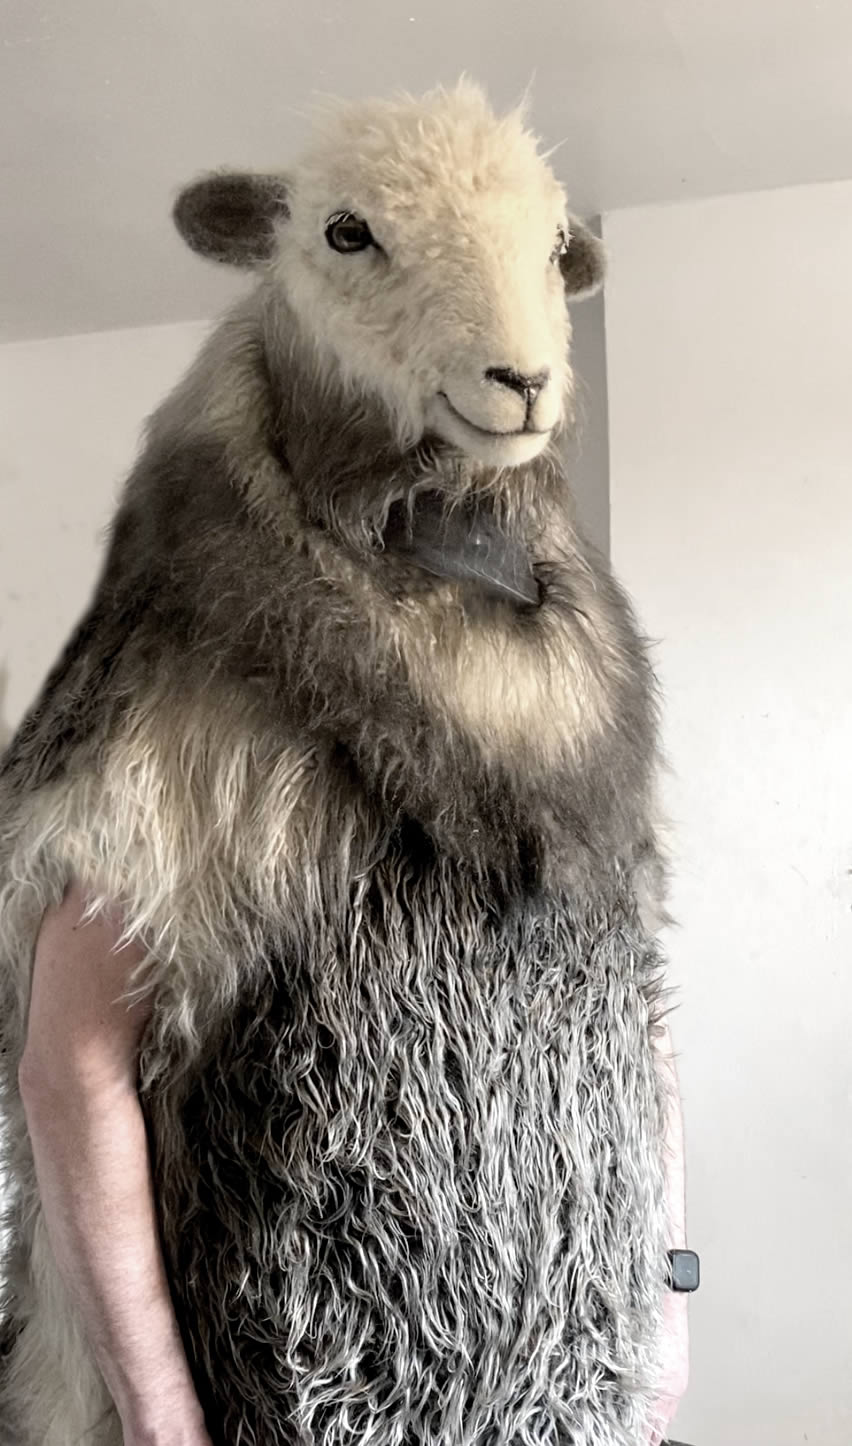 costume commission - realistic herdwick sheep creature suit with micro-controlled animatronic head